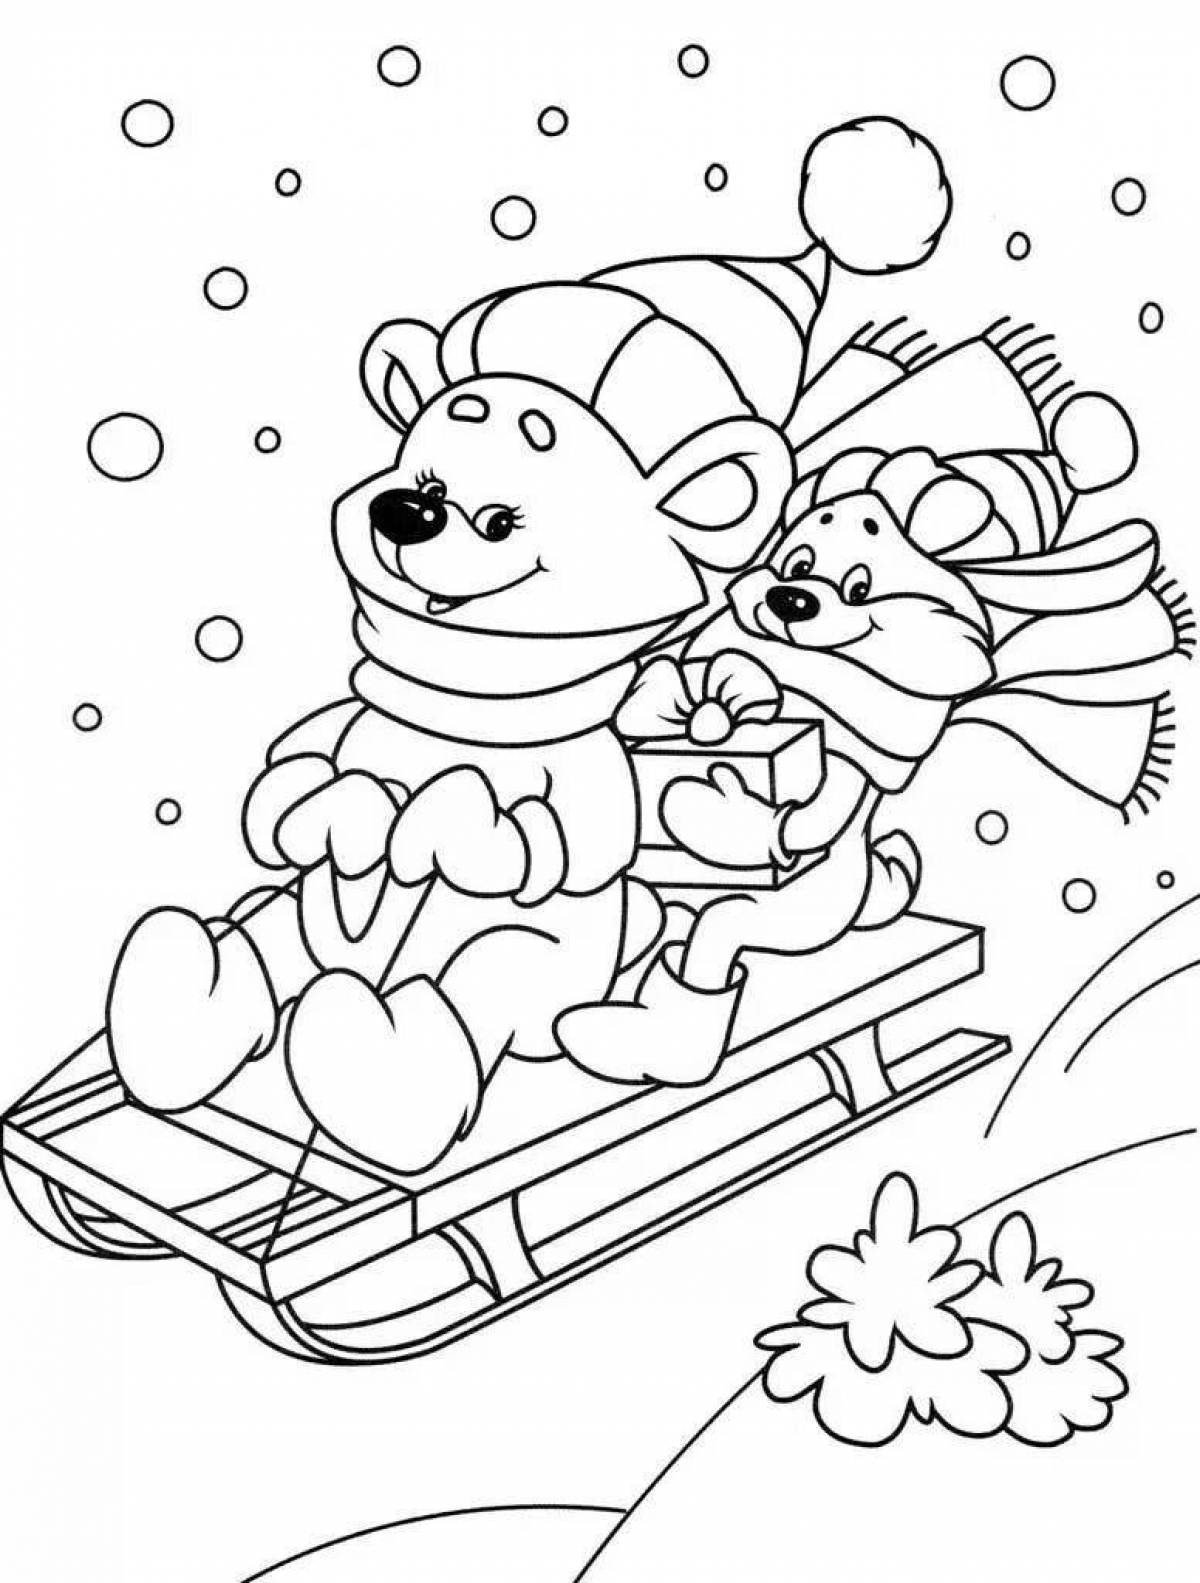 Shining winter coloring book for kids 4 5